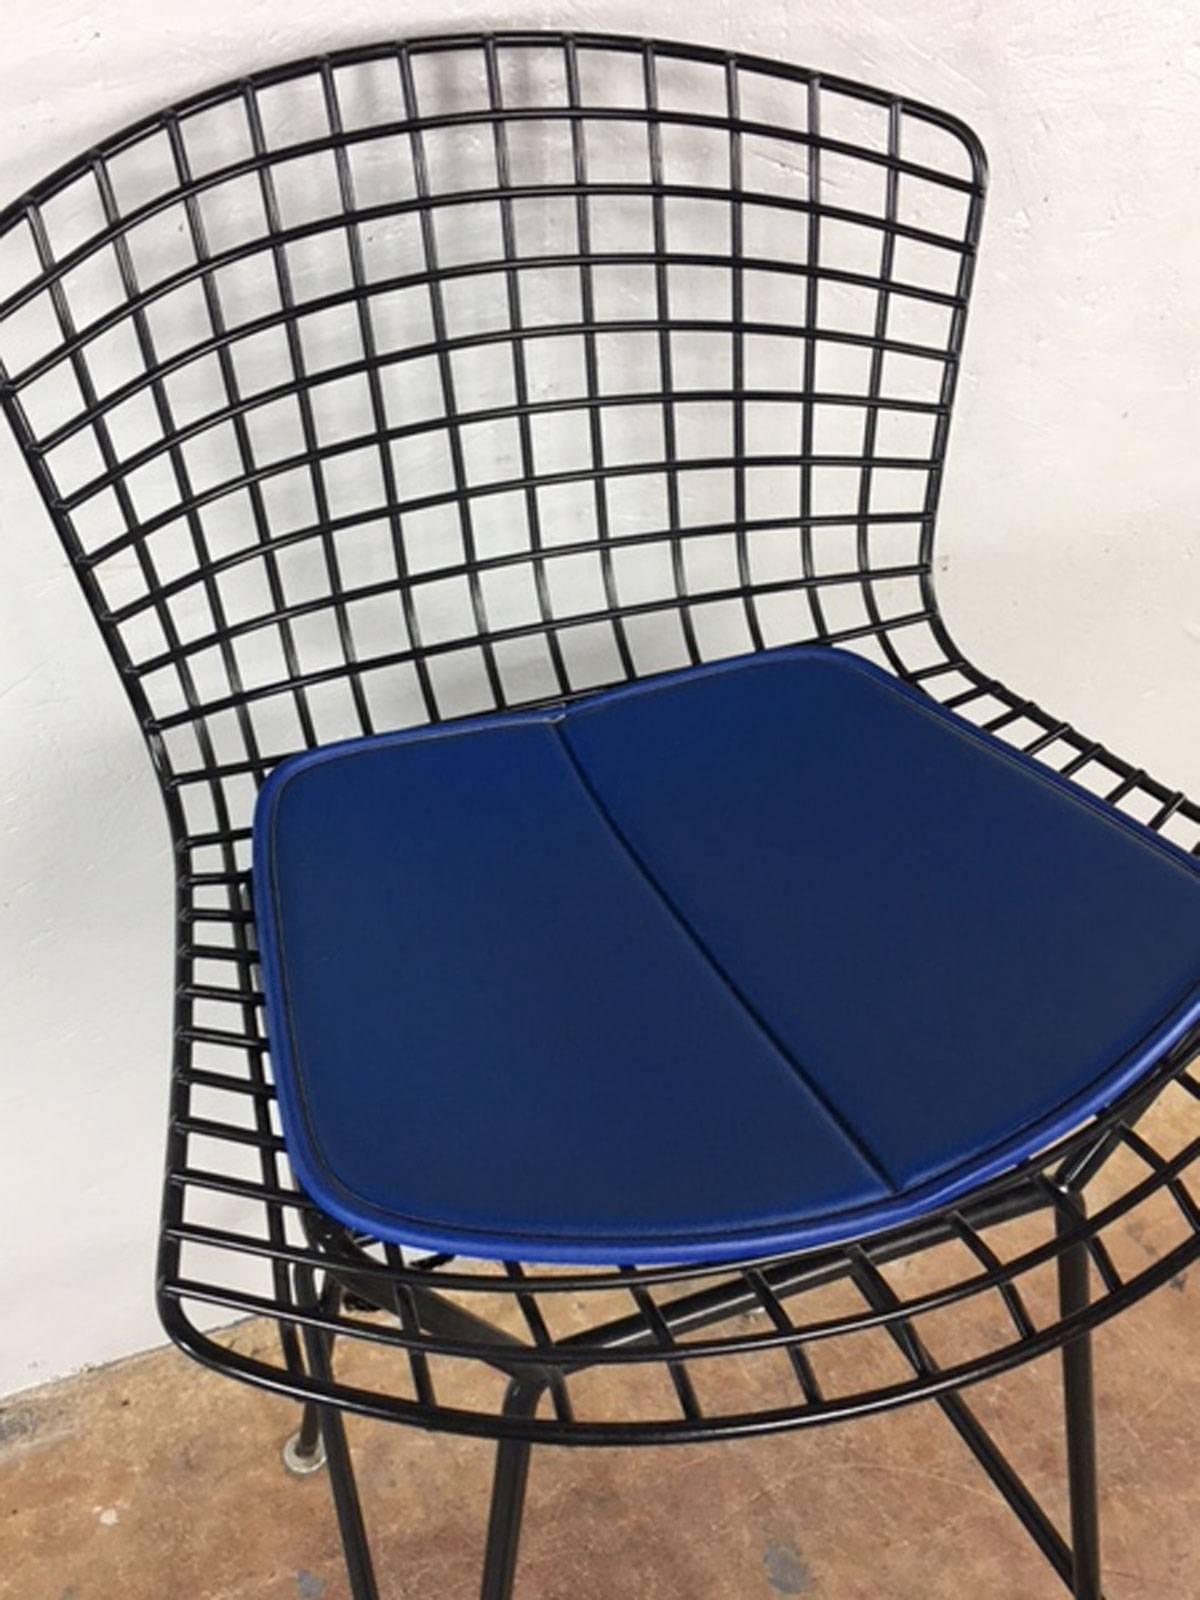 Bertoia Bar Stools by Knoll - 2 Left! In Excellent Condition For Sale In Phoenix, AZ